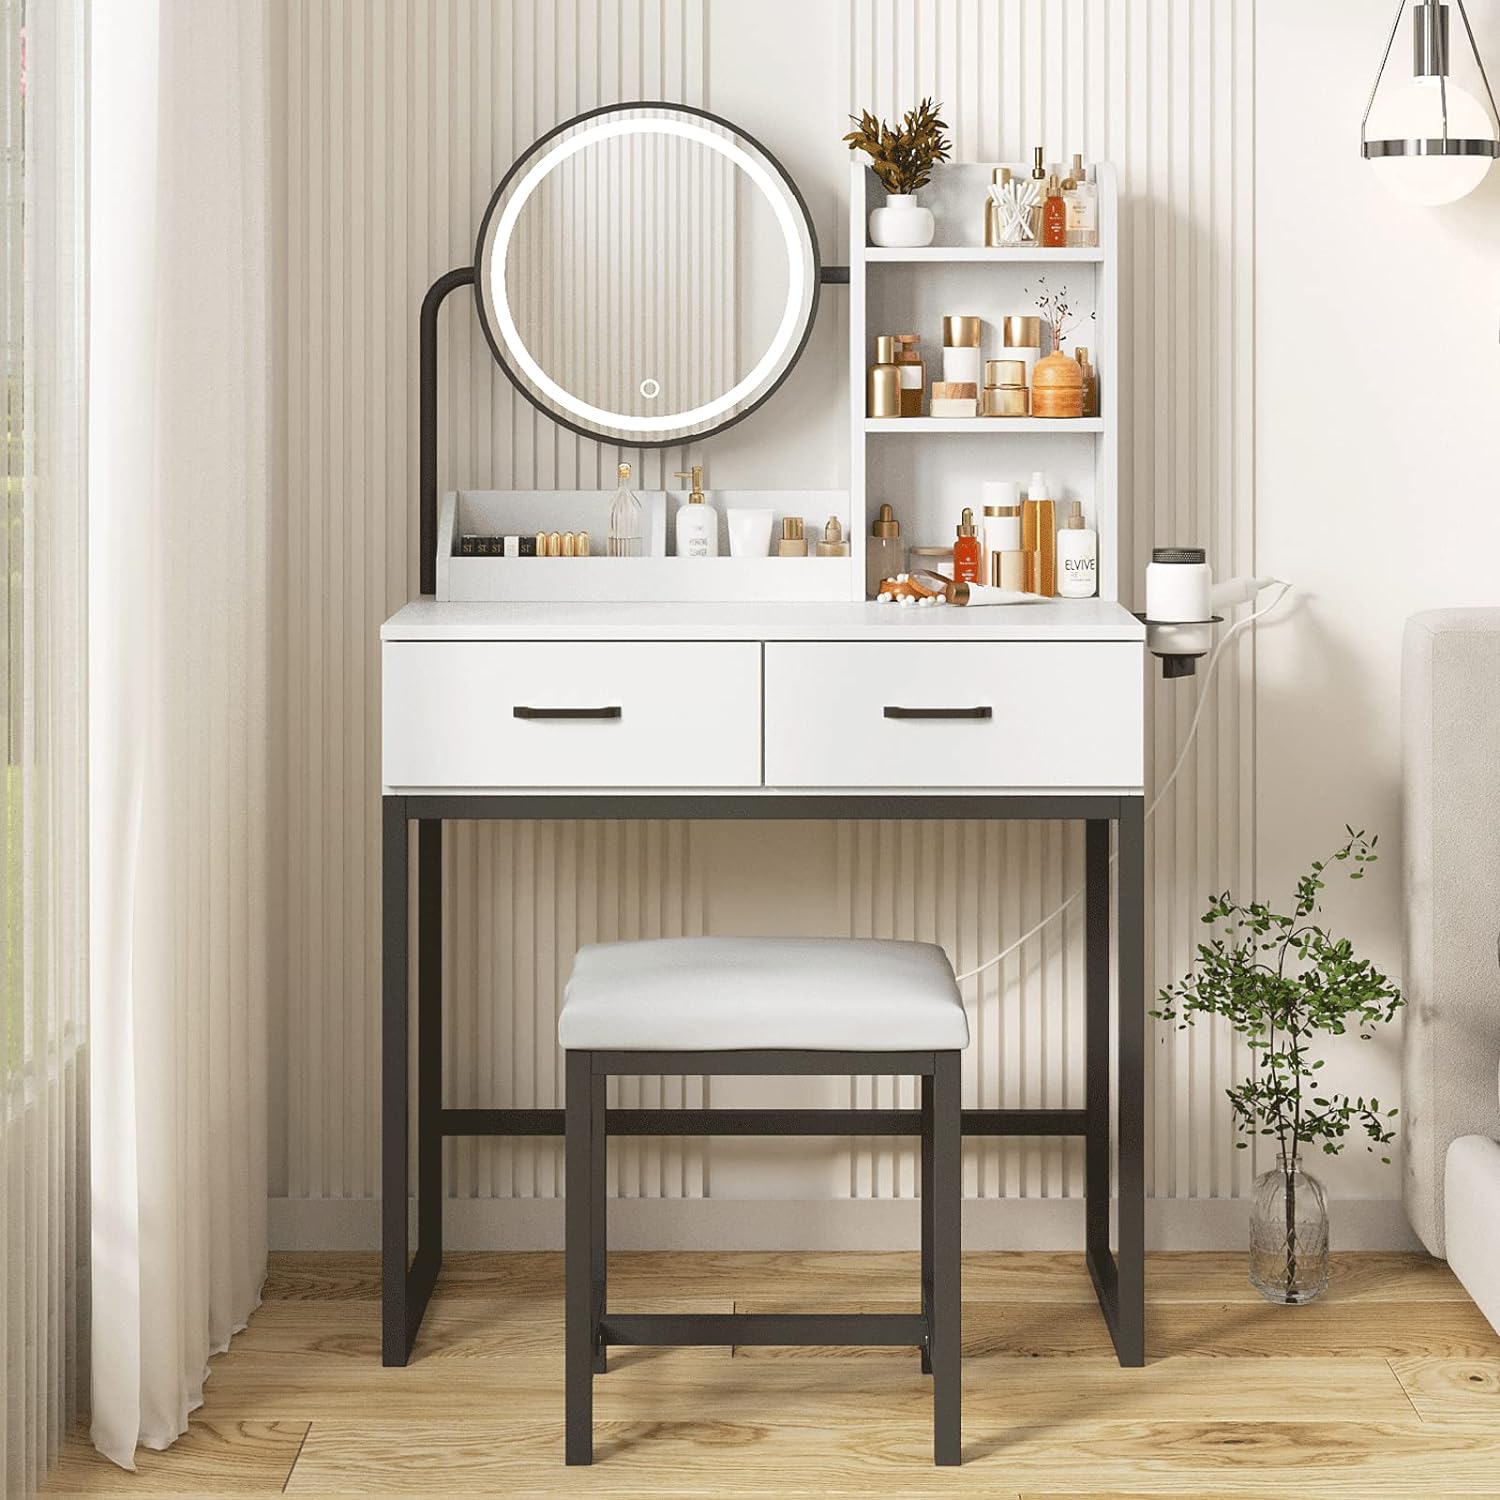 Makeup Vanity Desk with Mirror and Lights, Cute Vanity Makeup Table, Small Vanity Table for Bedroom with Lots Storage, 3 Lighting Modes, 31.5in(L)